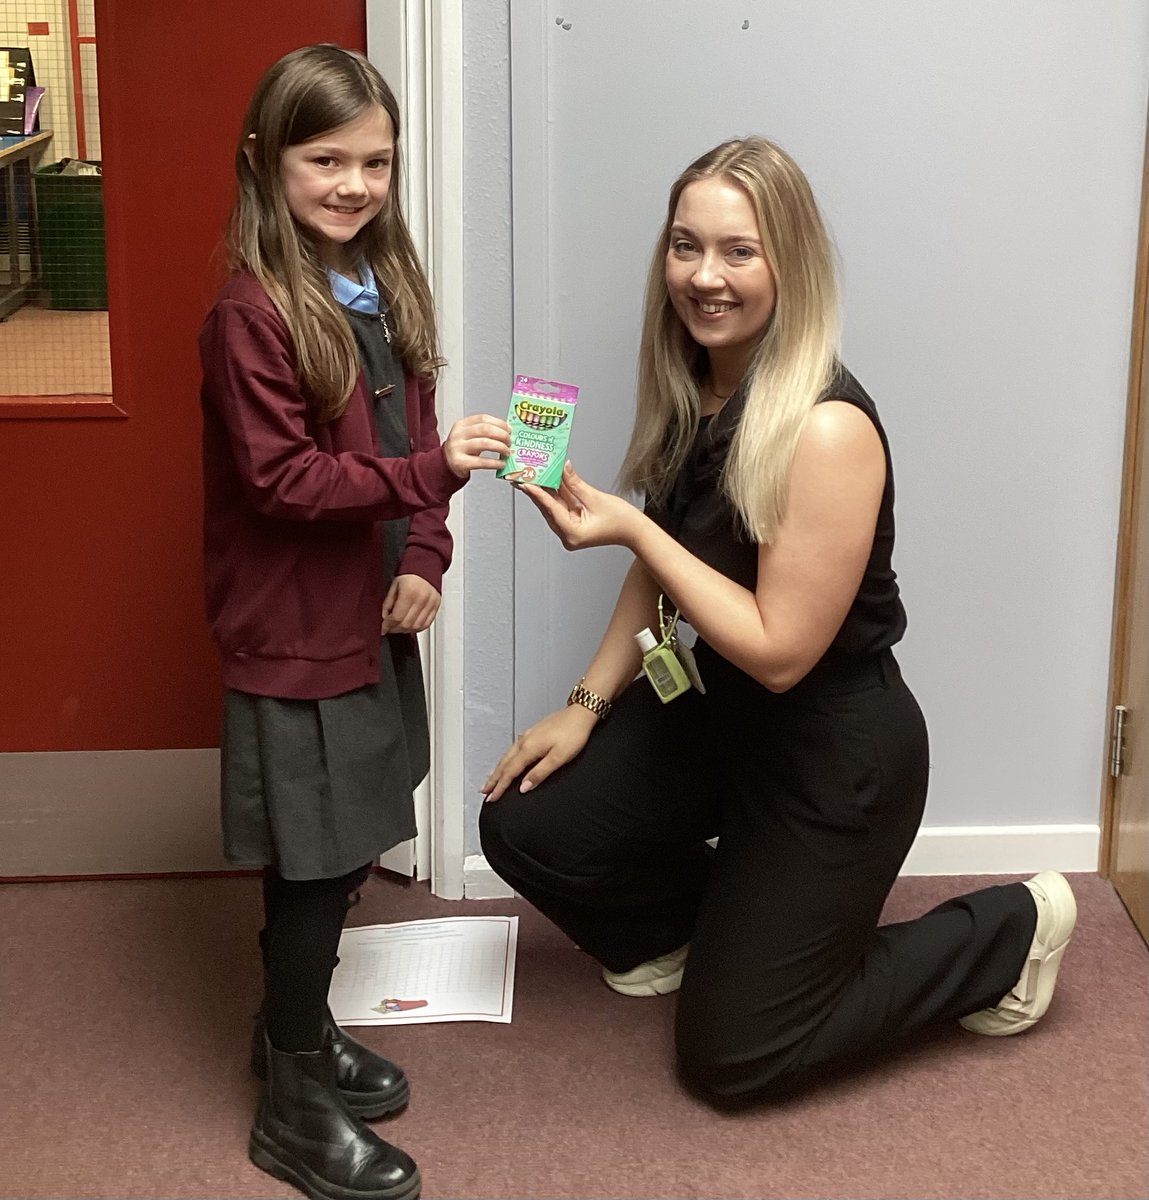 Miss Bailey, our mental health lead, was overwhelmed with happiness this morning when she received a kind and thoughtful gift from Daisy- some colours of kindness! ‘A warm hug’ and ‘a slice of nice’ are her favourite colours! @AdAstraTrust